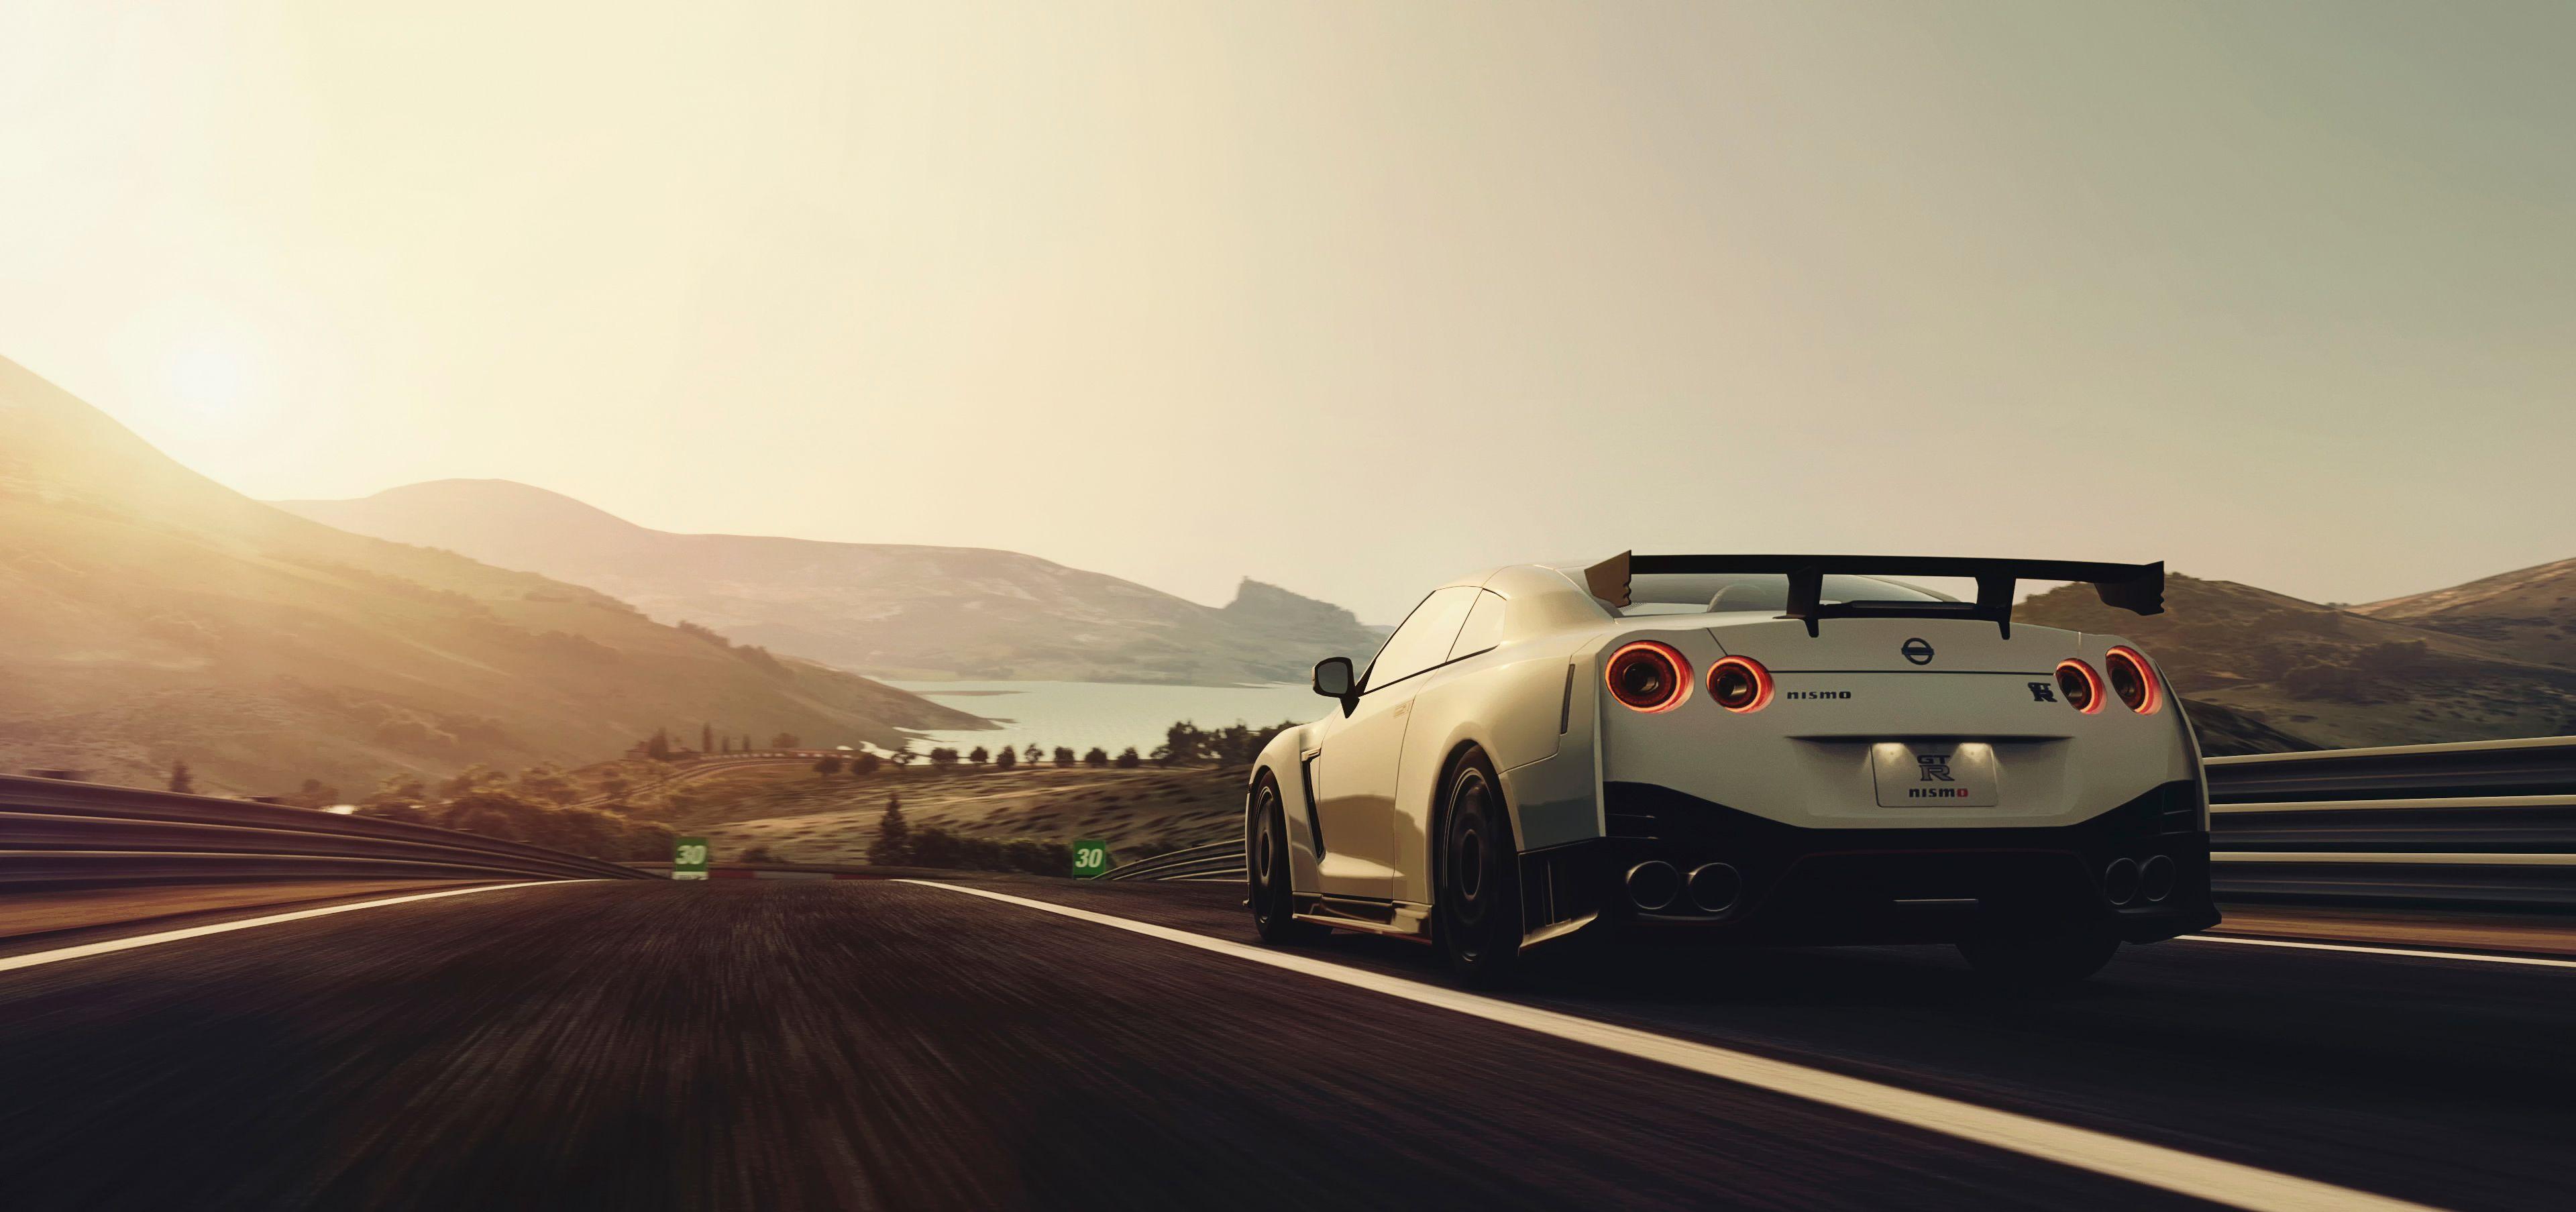 Nissan GT-R Nismo Wallpapers - Wallpaper Cave